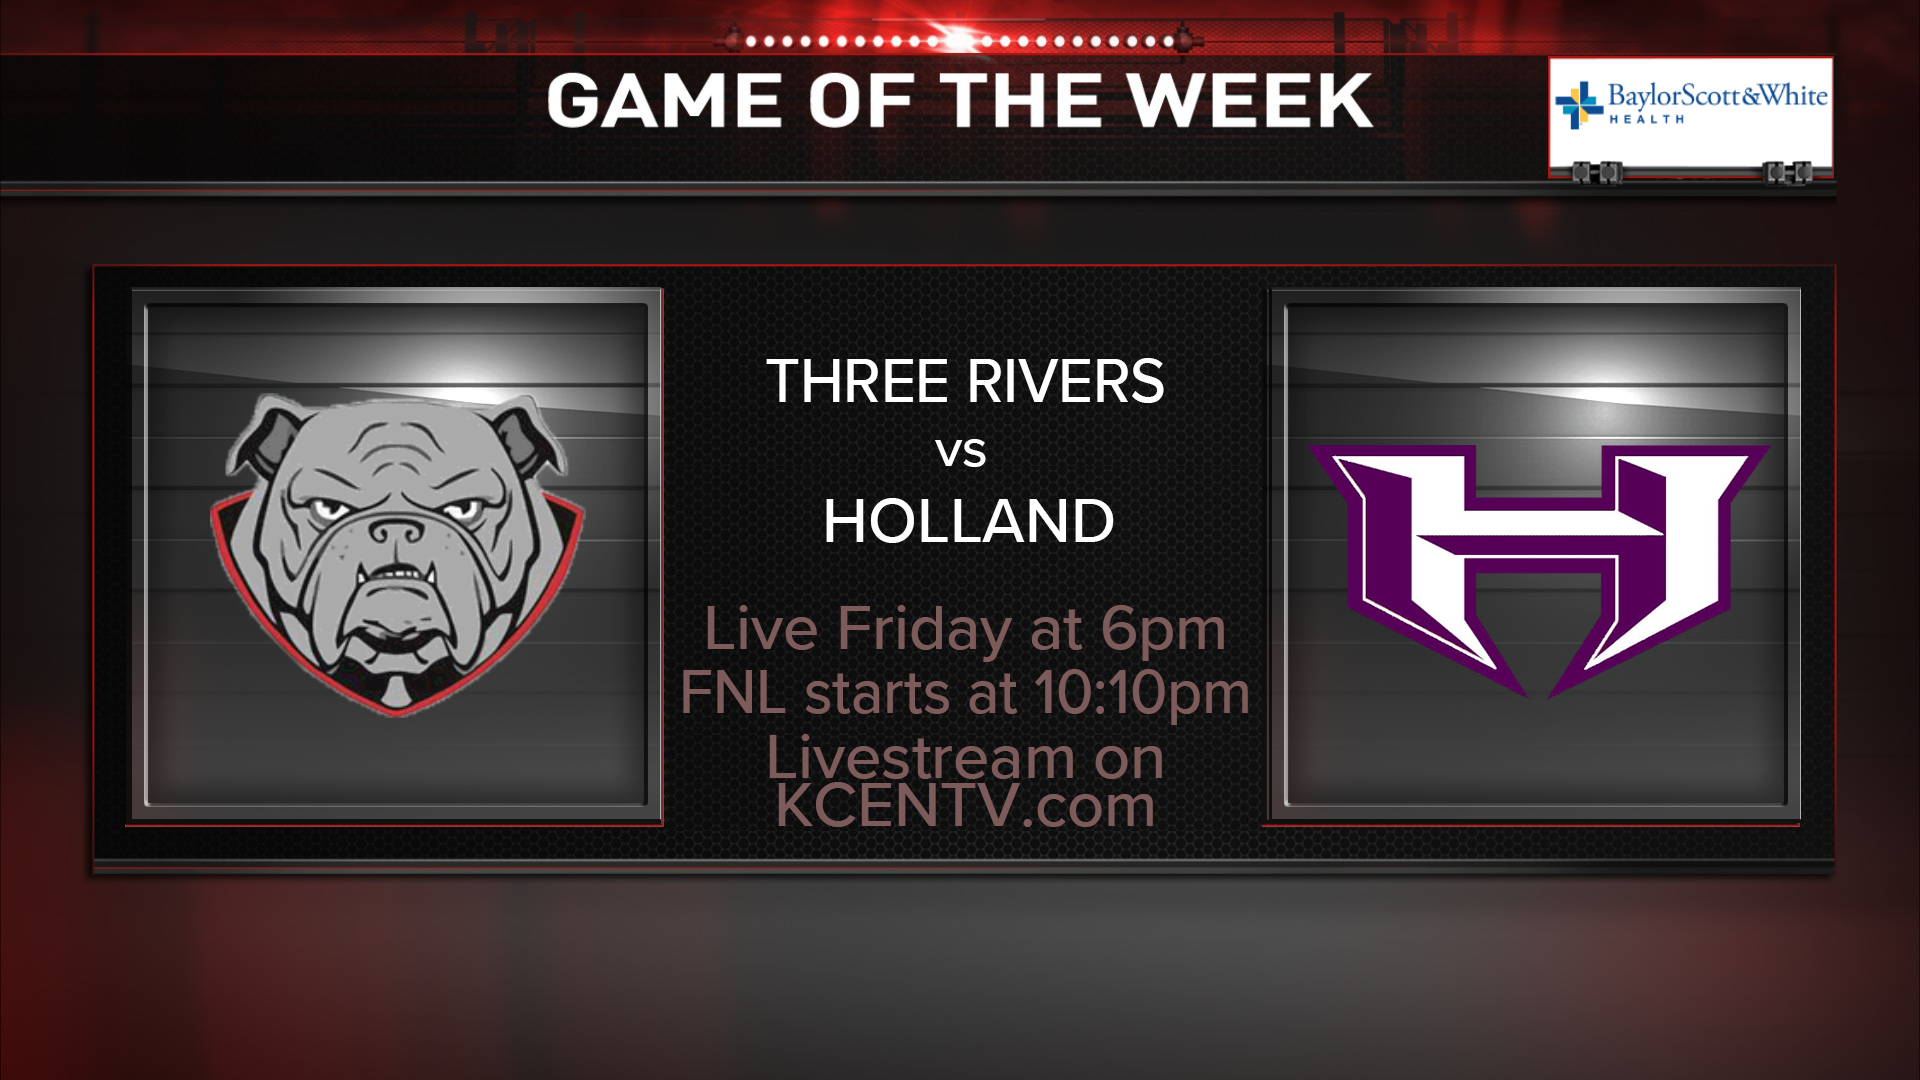 Holland goes against Three Rivers for our final Game of the Week!